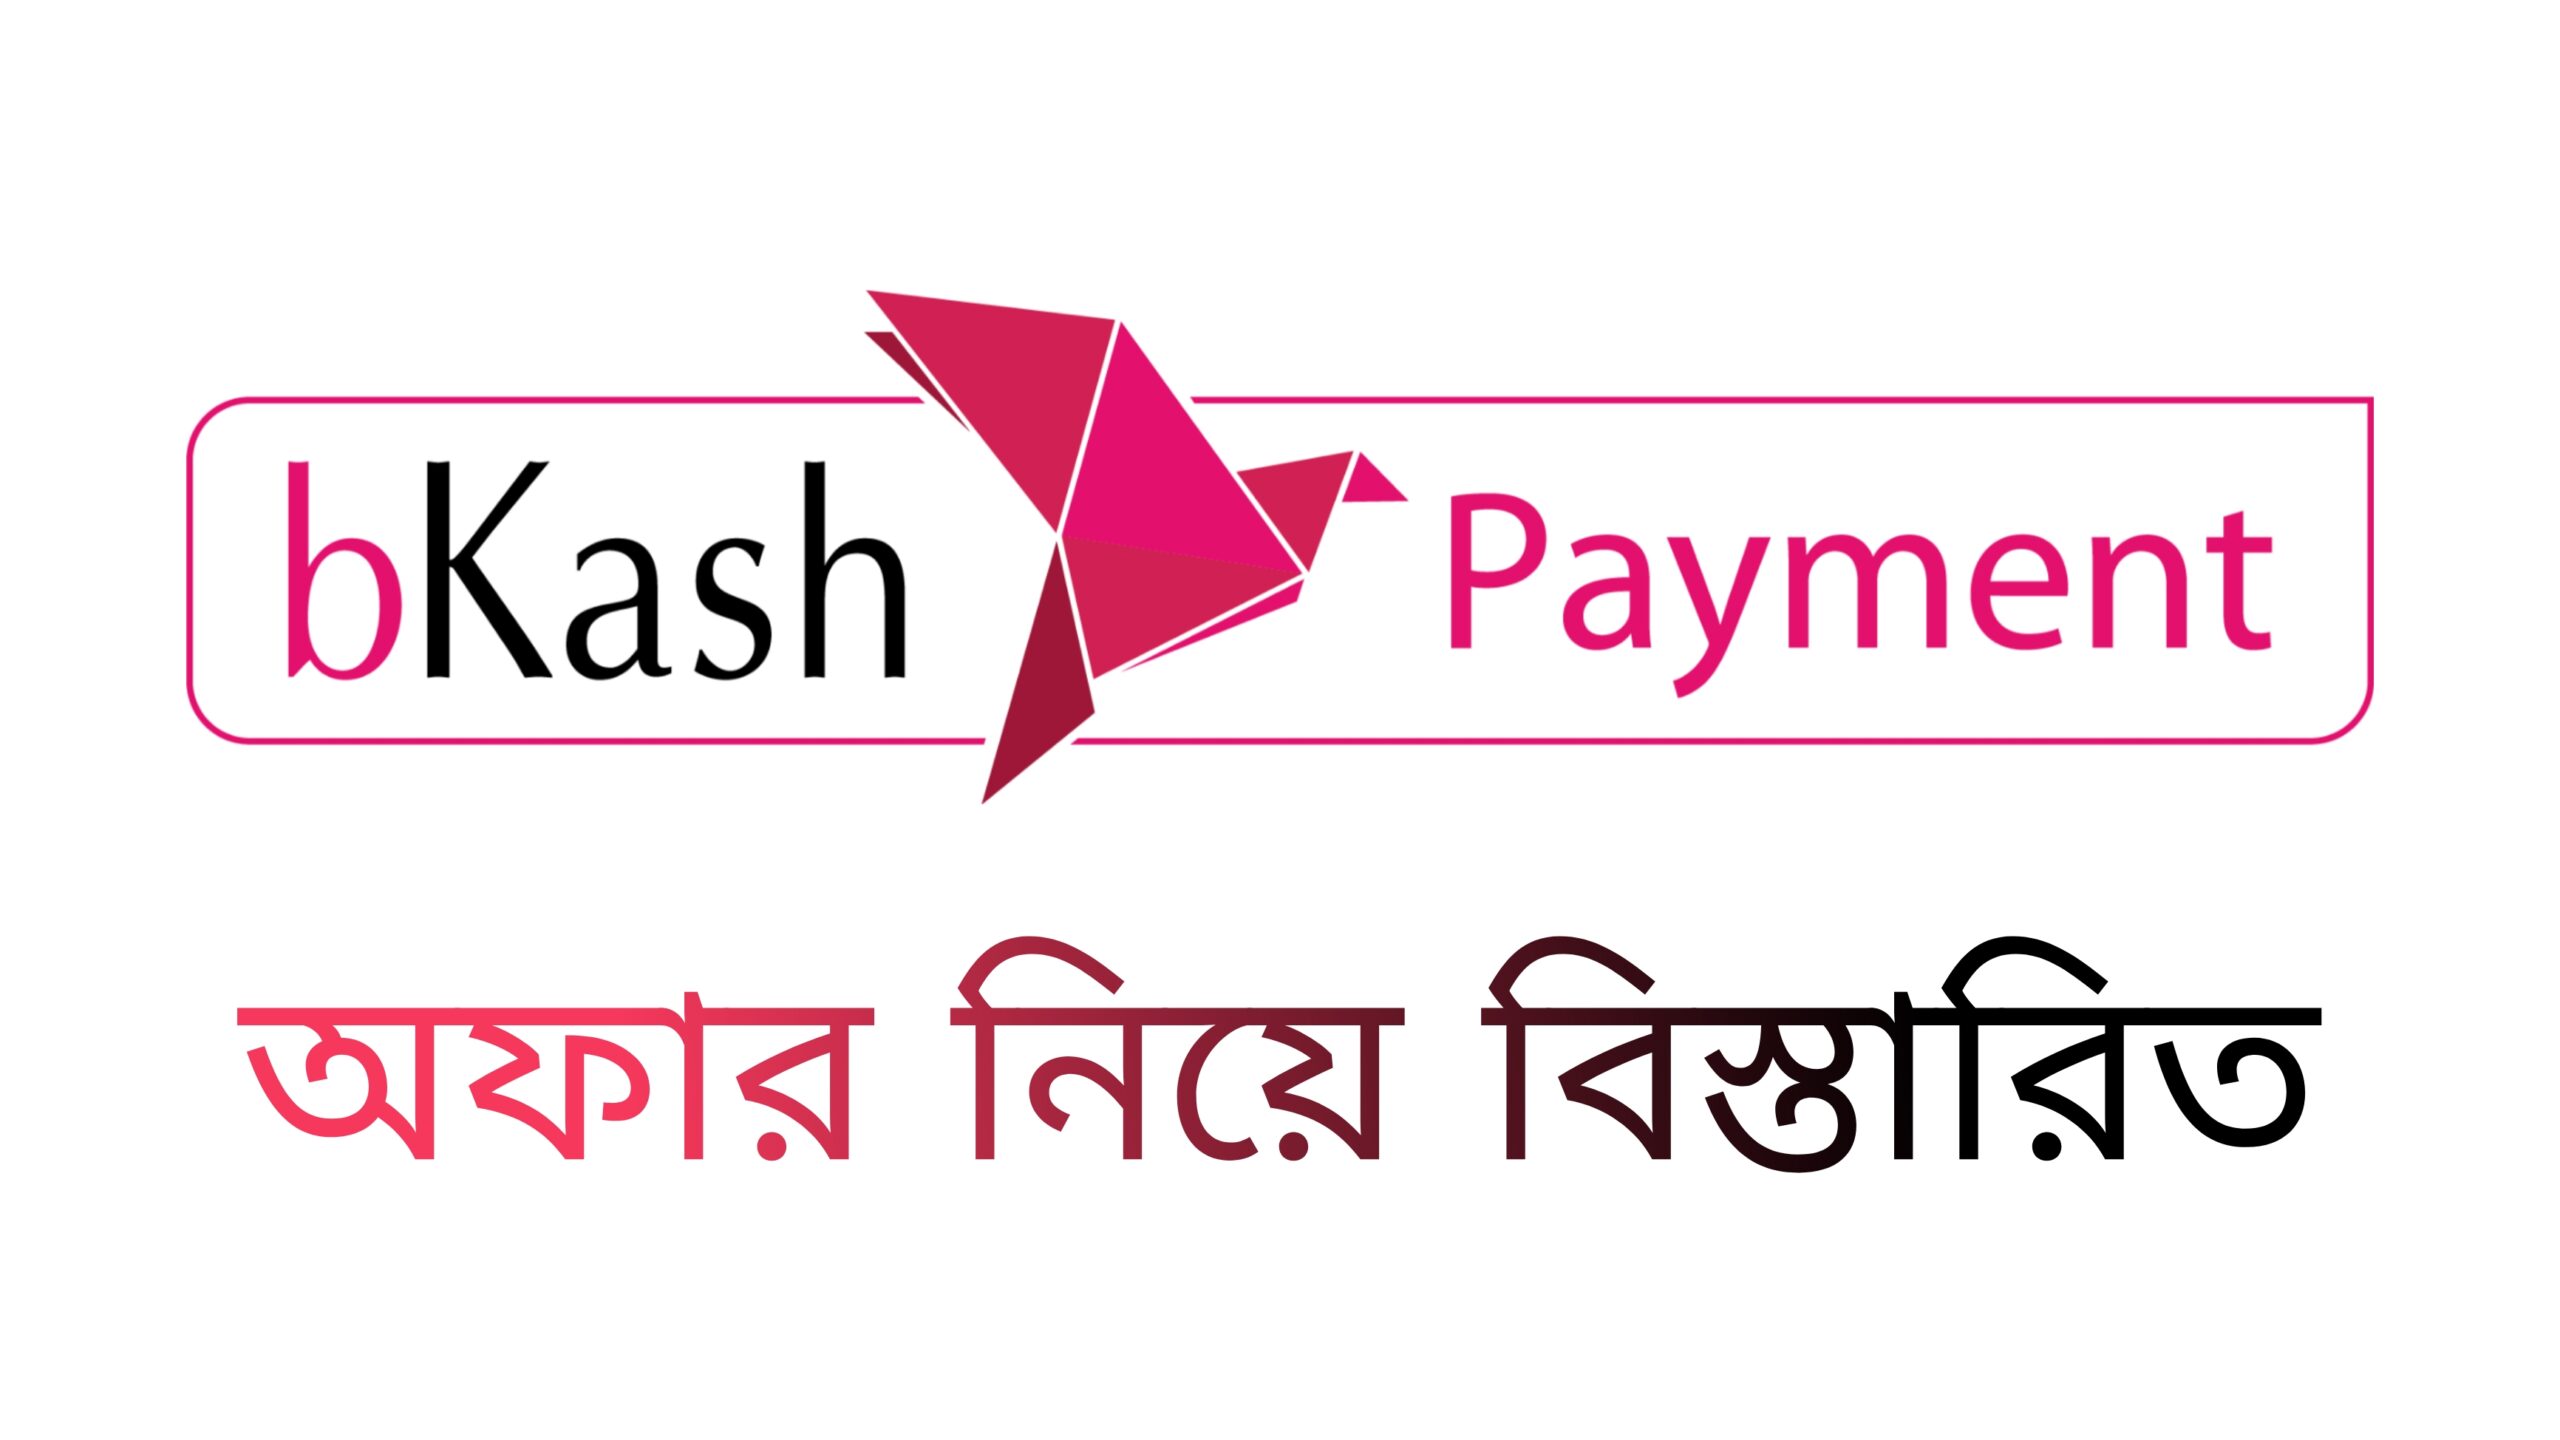 Bkash payment offer in daraz 